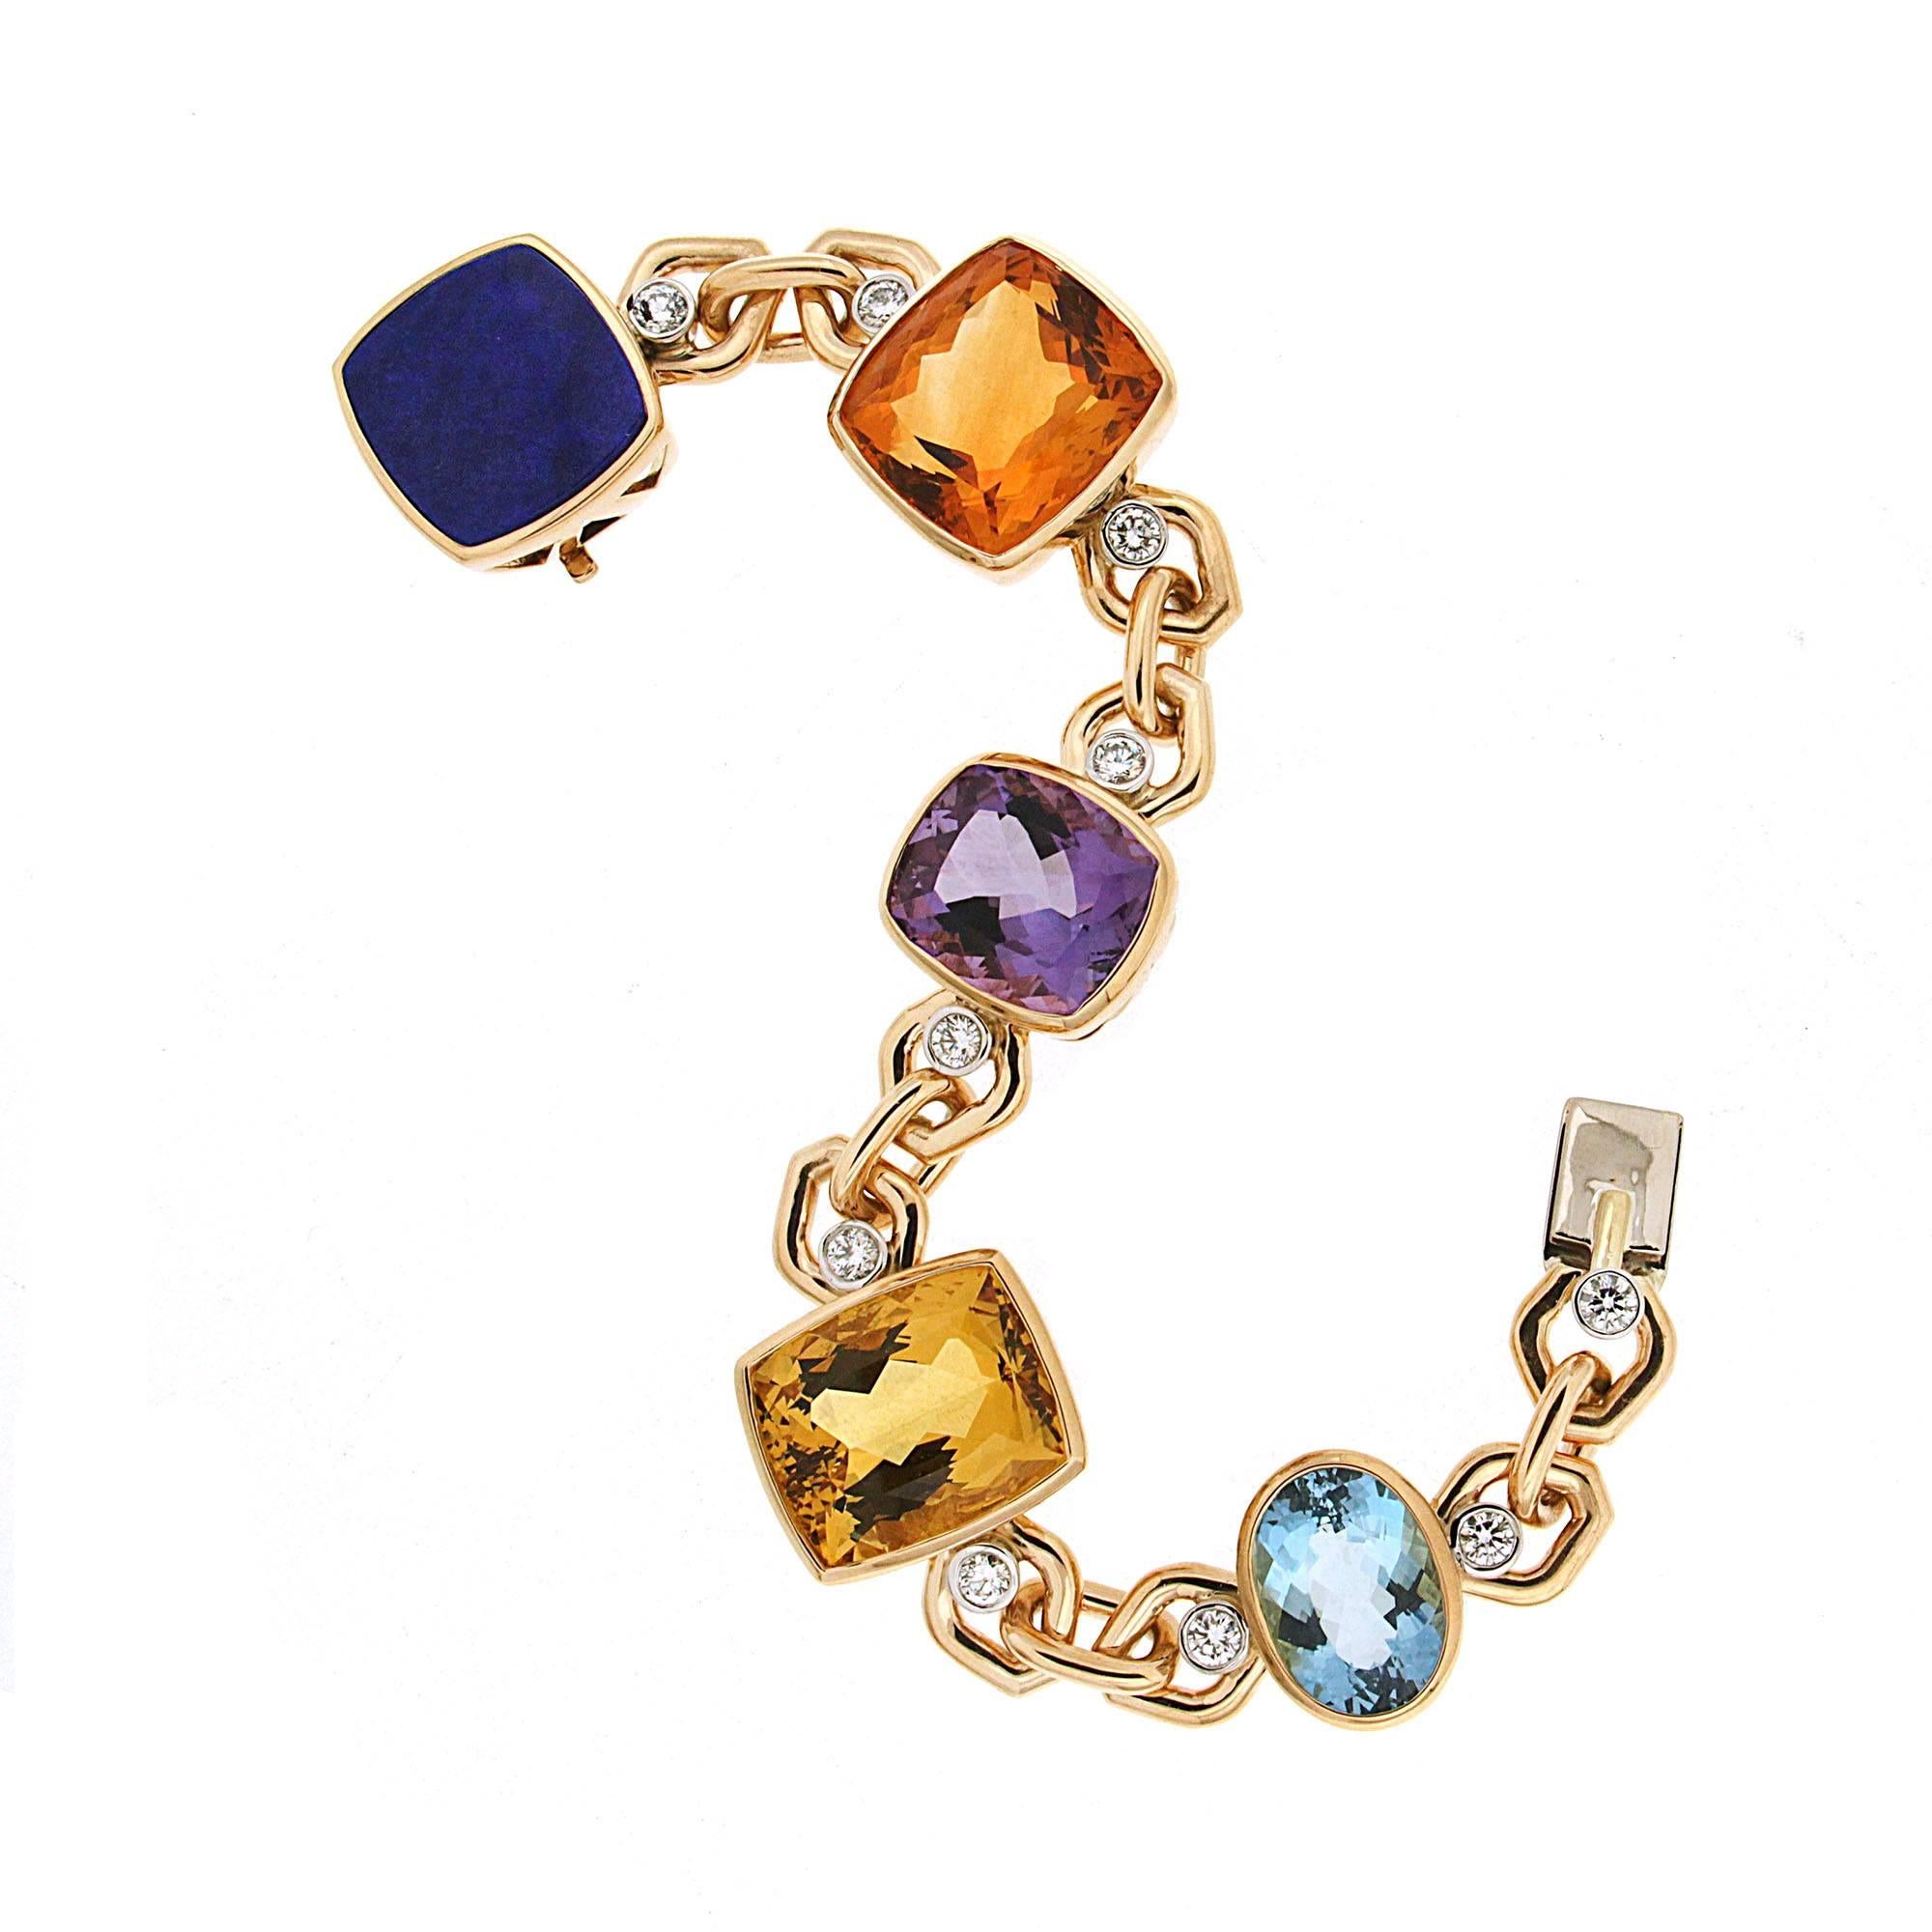 This unique multi-color gemstone link bracelet features Cushion Maderia Citrine, Yellow Beryl, Amethyst, Oval Aquamarine and Lapis Lazuli with round brilliant diamonds in 18kt yellow gold. 